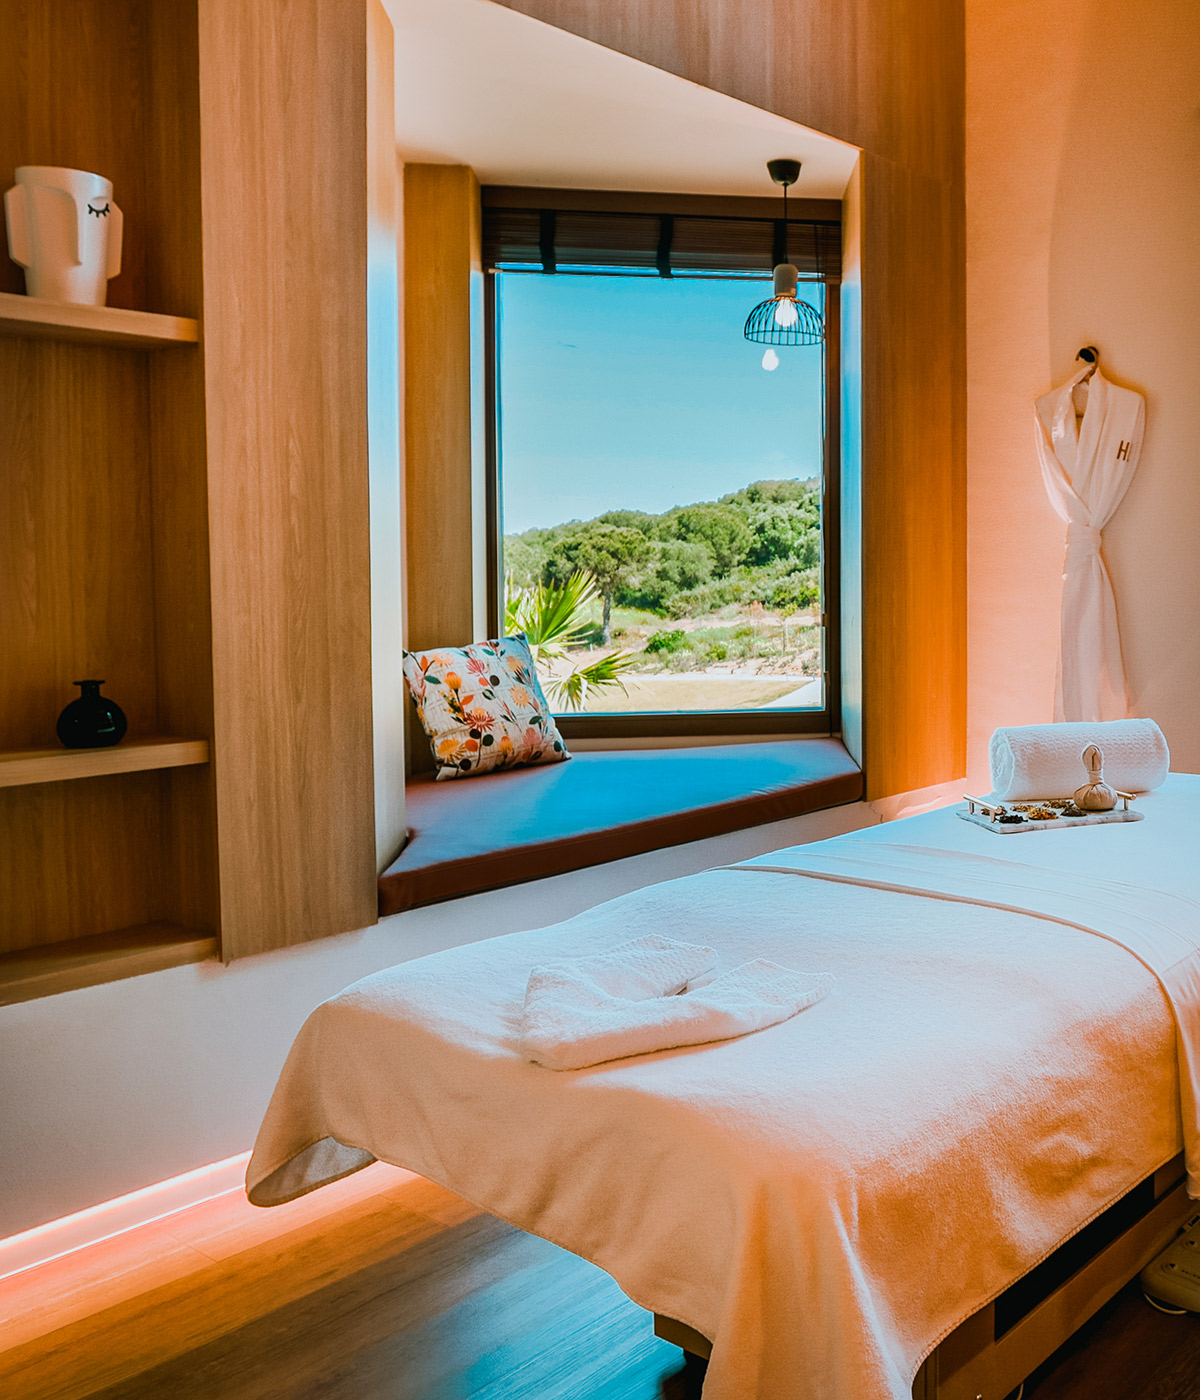 White-sheeted massage table in warm room with view across the coast